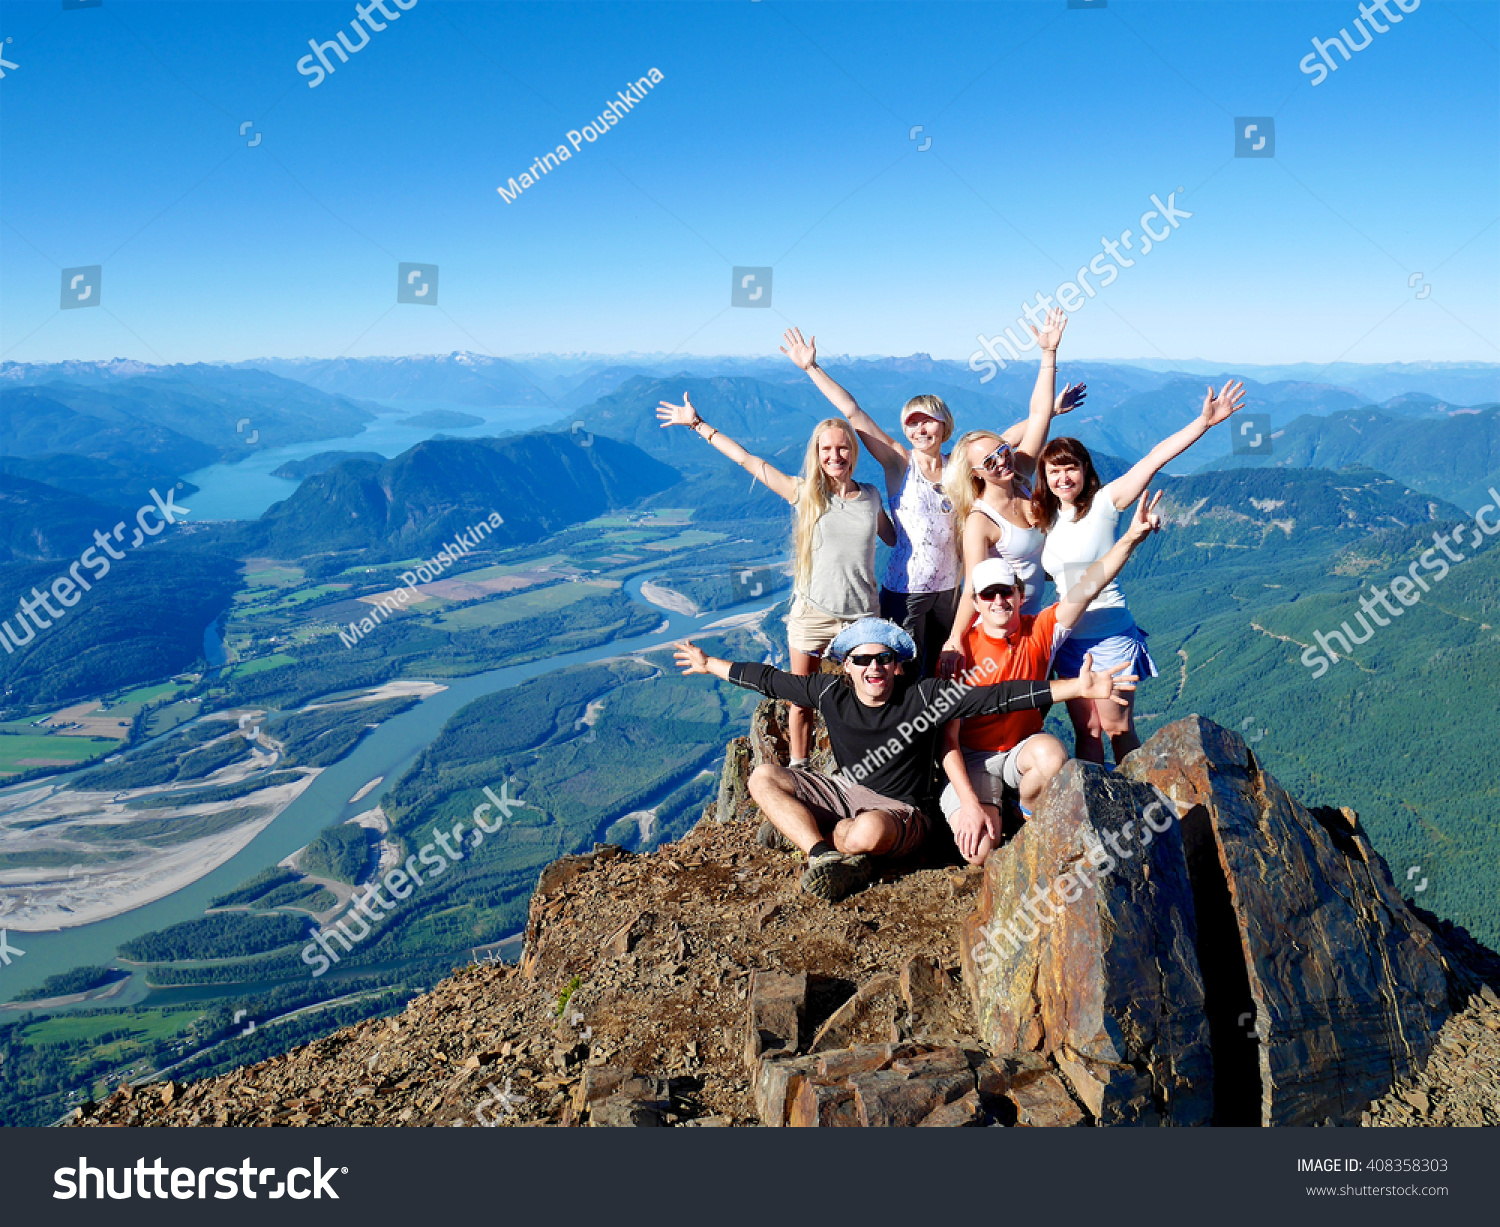 Successful Group of Happy Friends on Mountain Top, Cheering. 
Mount Cheam Summit,  British Columbia, Canada.  #408358303